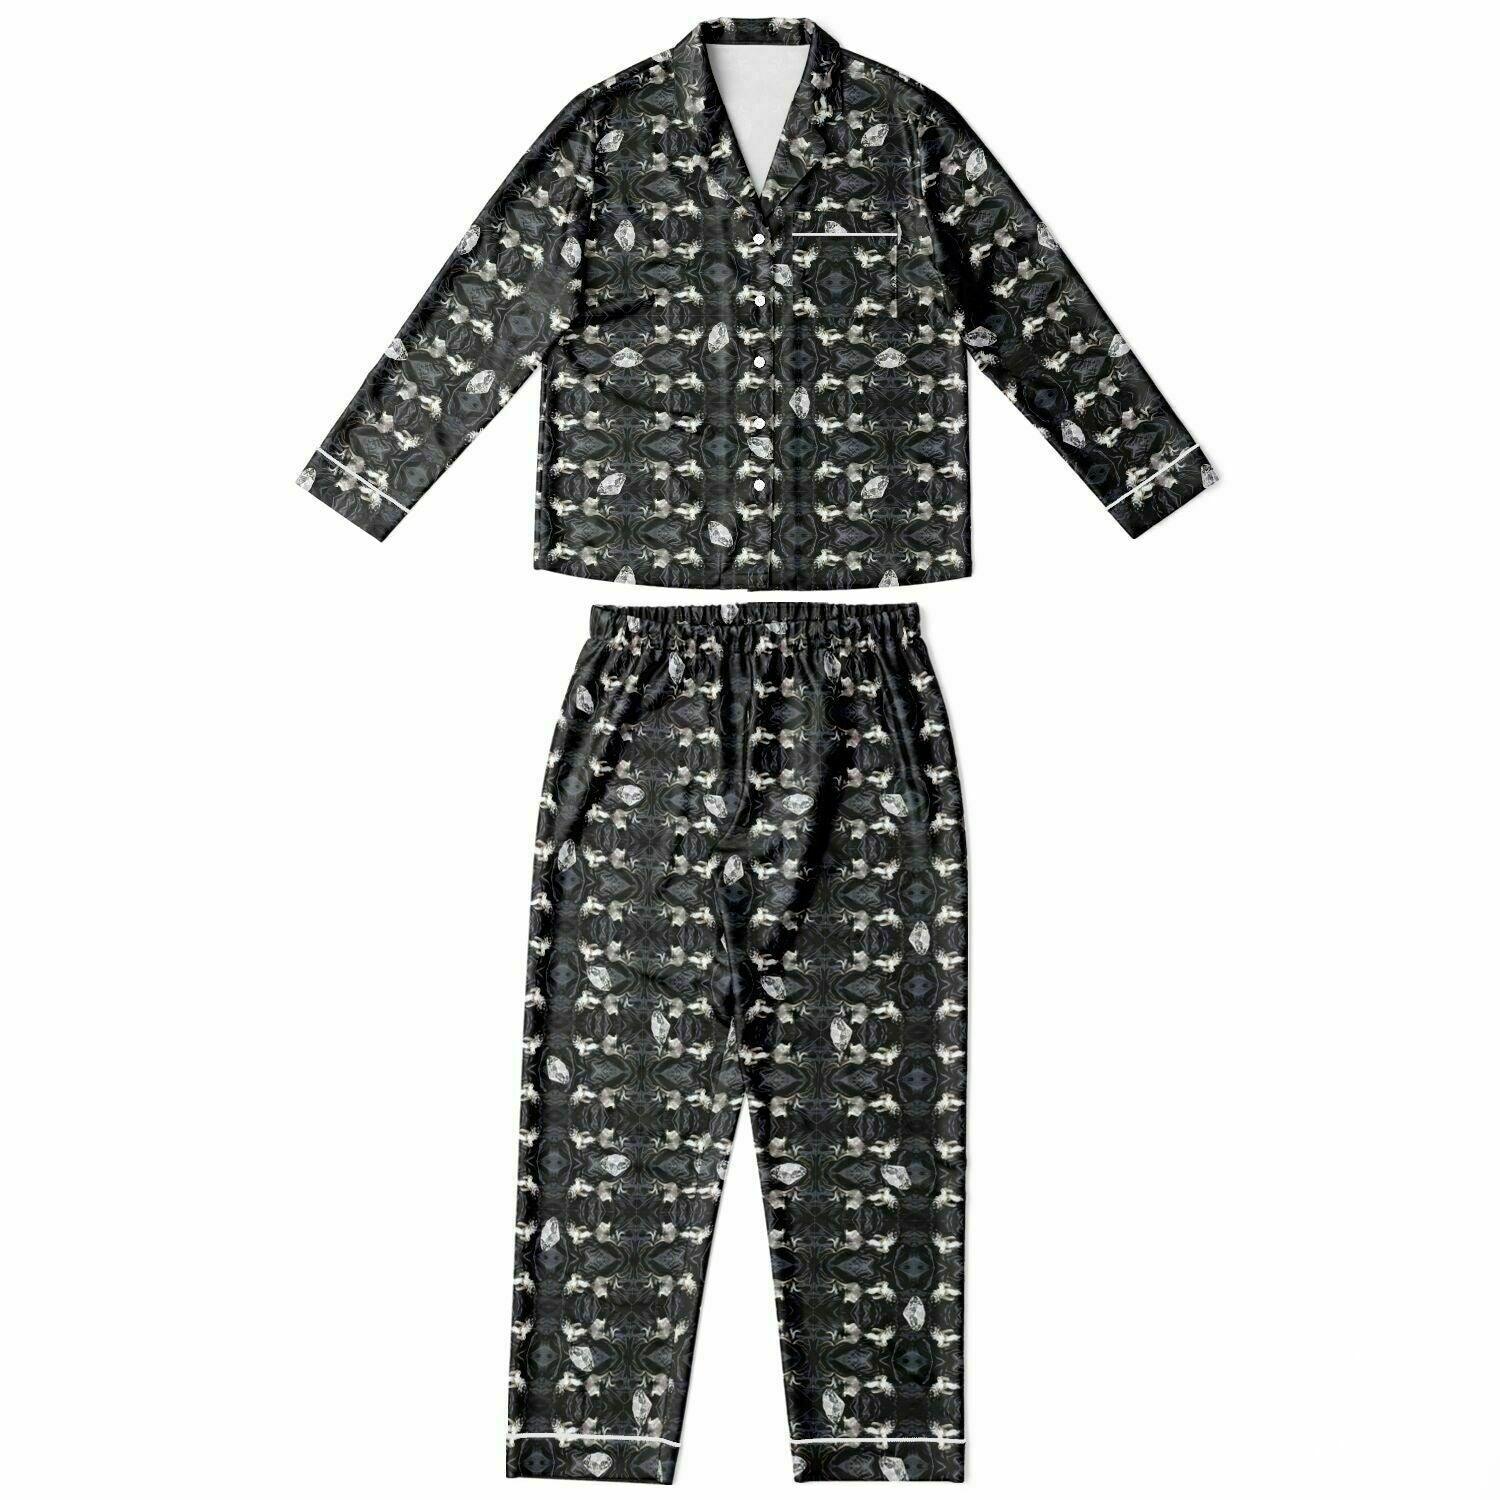 Make a chic fashion statement with this luxurious art deco style satin pajamas set. It features a cute chihuahua posing on a black silk sheet. On repeat. And a scattering of diamonds! Divine. This silky soft pajamas set makes the perfect gift for your Queen who loves chihuahuas. And diamonds. Bling bling. You win!